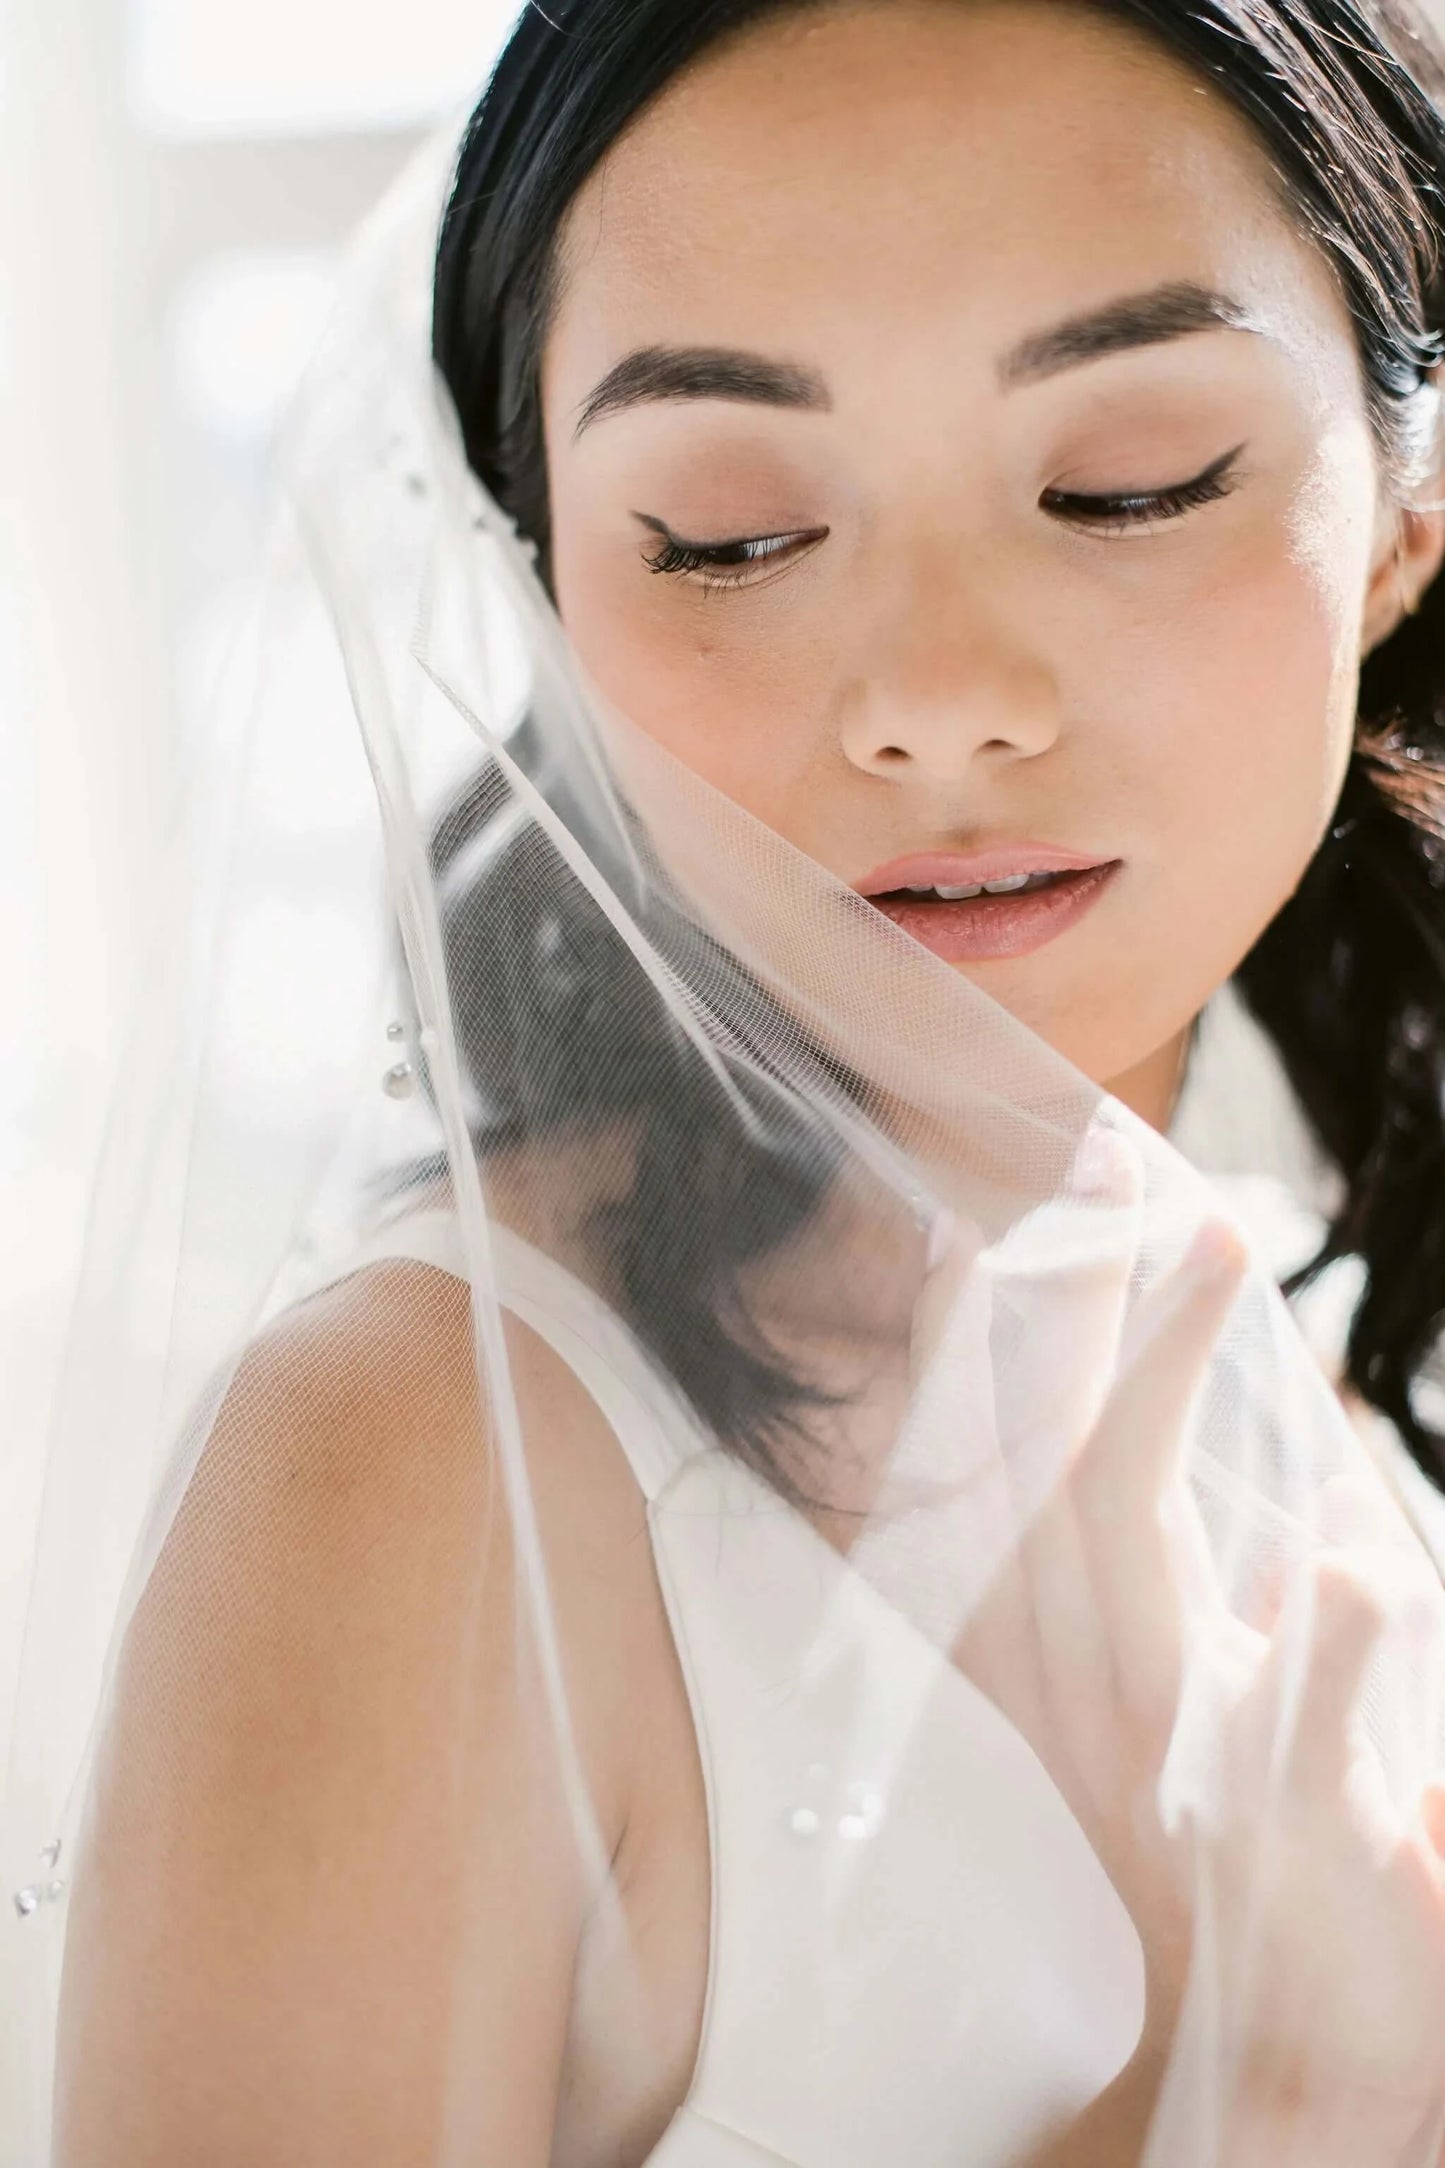 Illusion tulle veil with trio crystal accents - ready to ship Tessa Kim